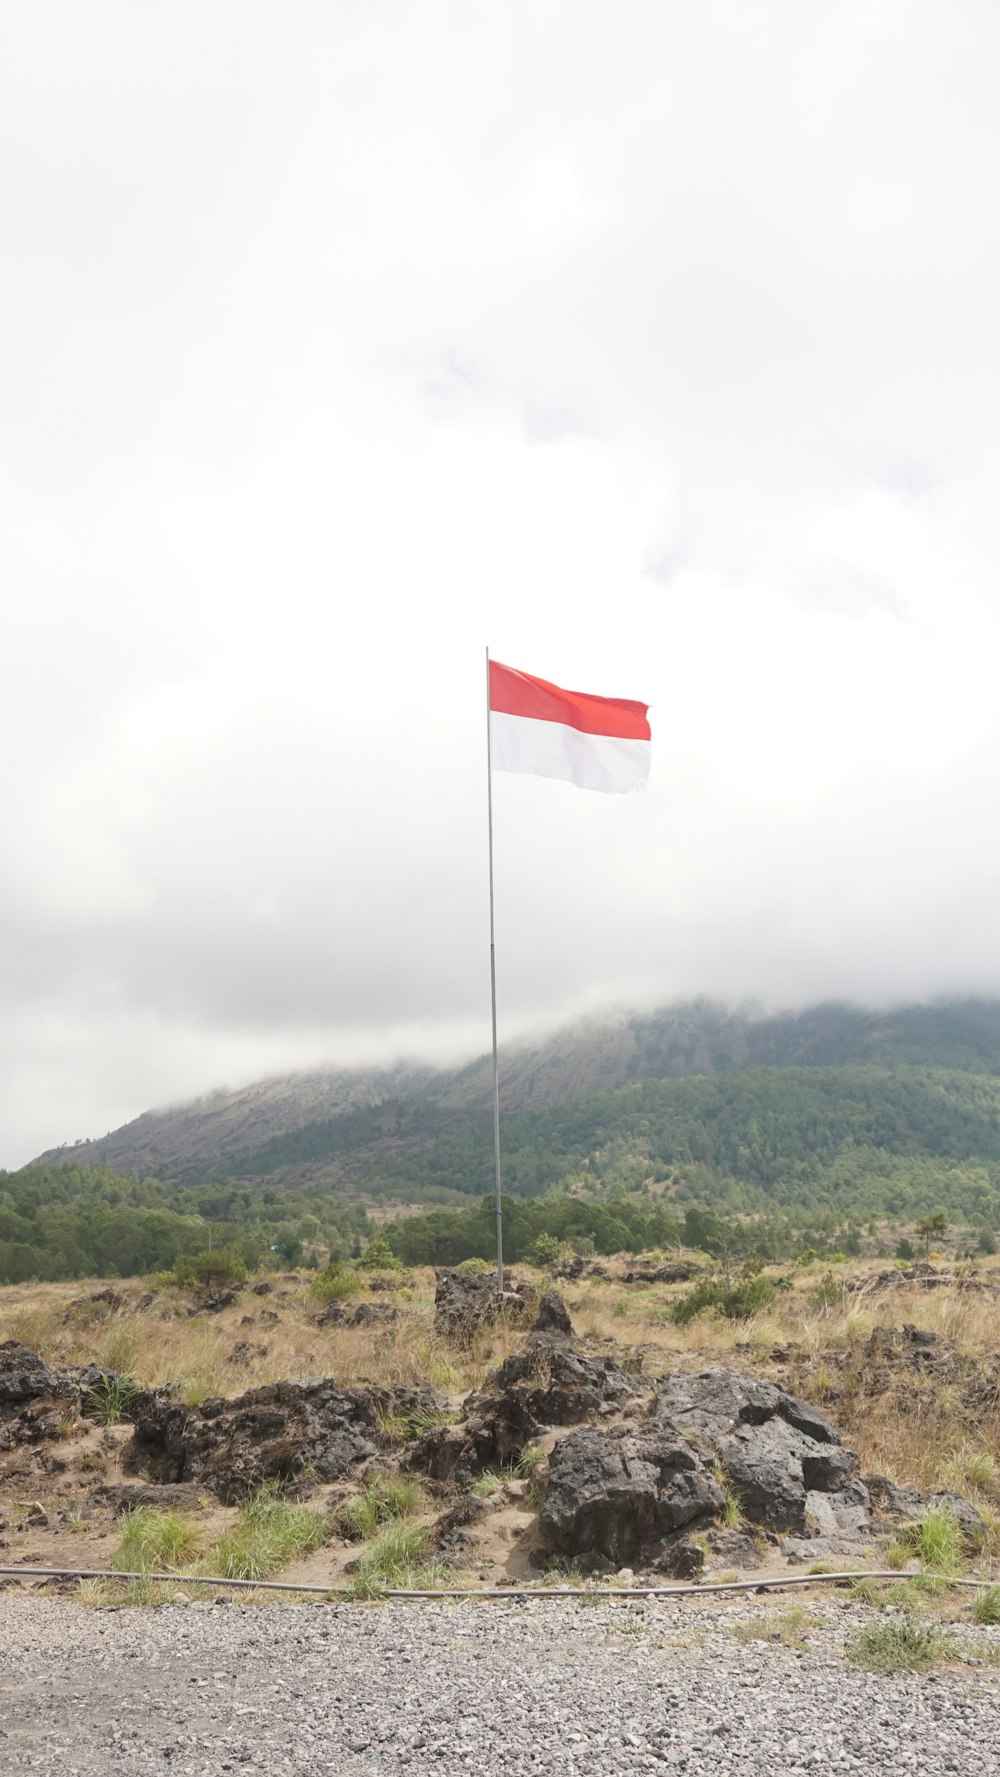 a red and white flag on a pole in the middle of a field